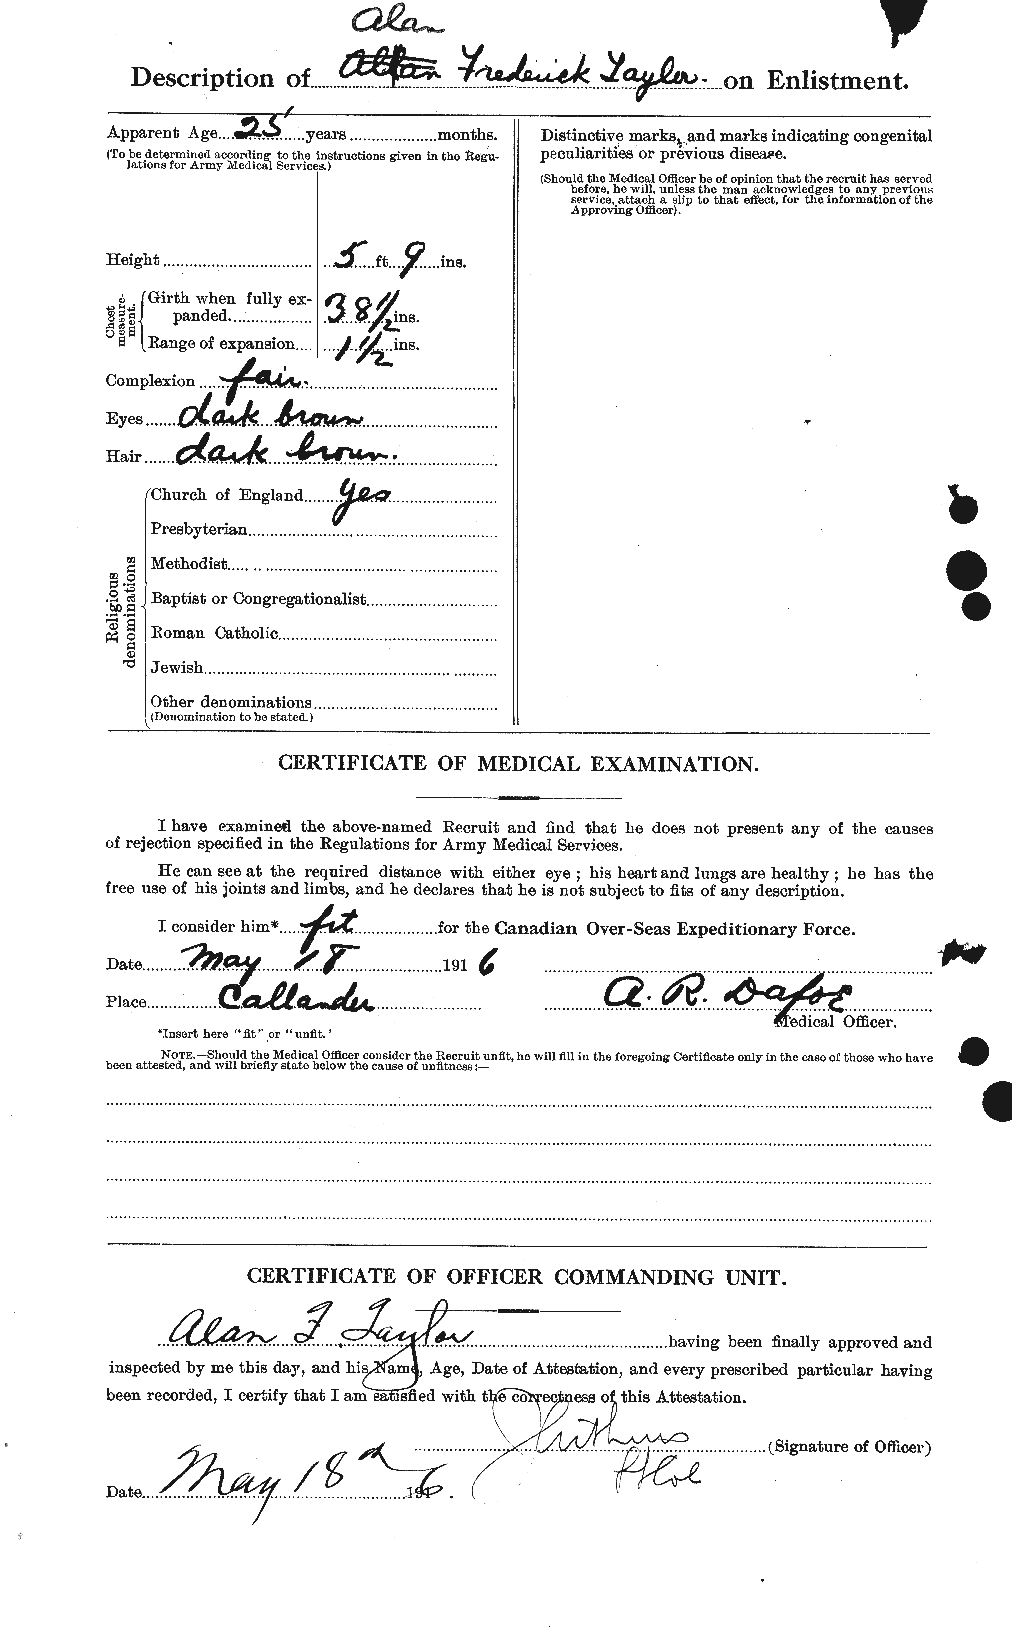 Personnel Records of the First World War - CEF 626205b